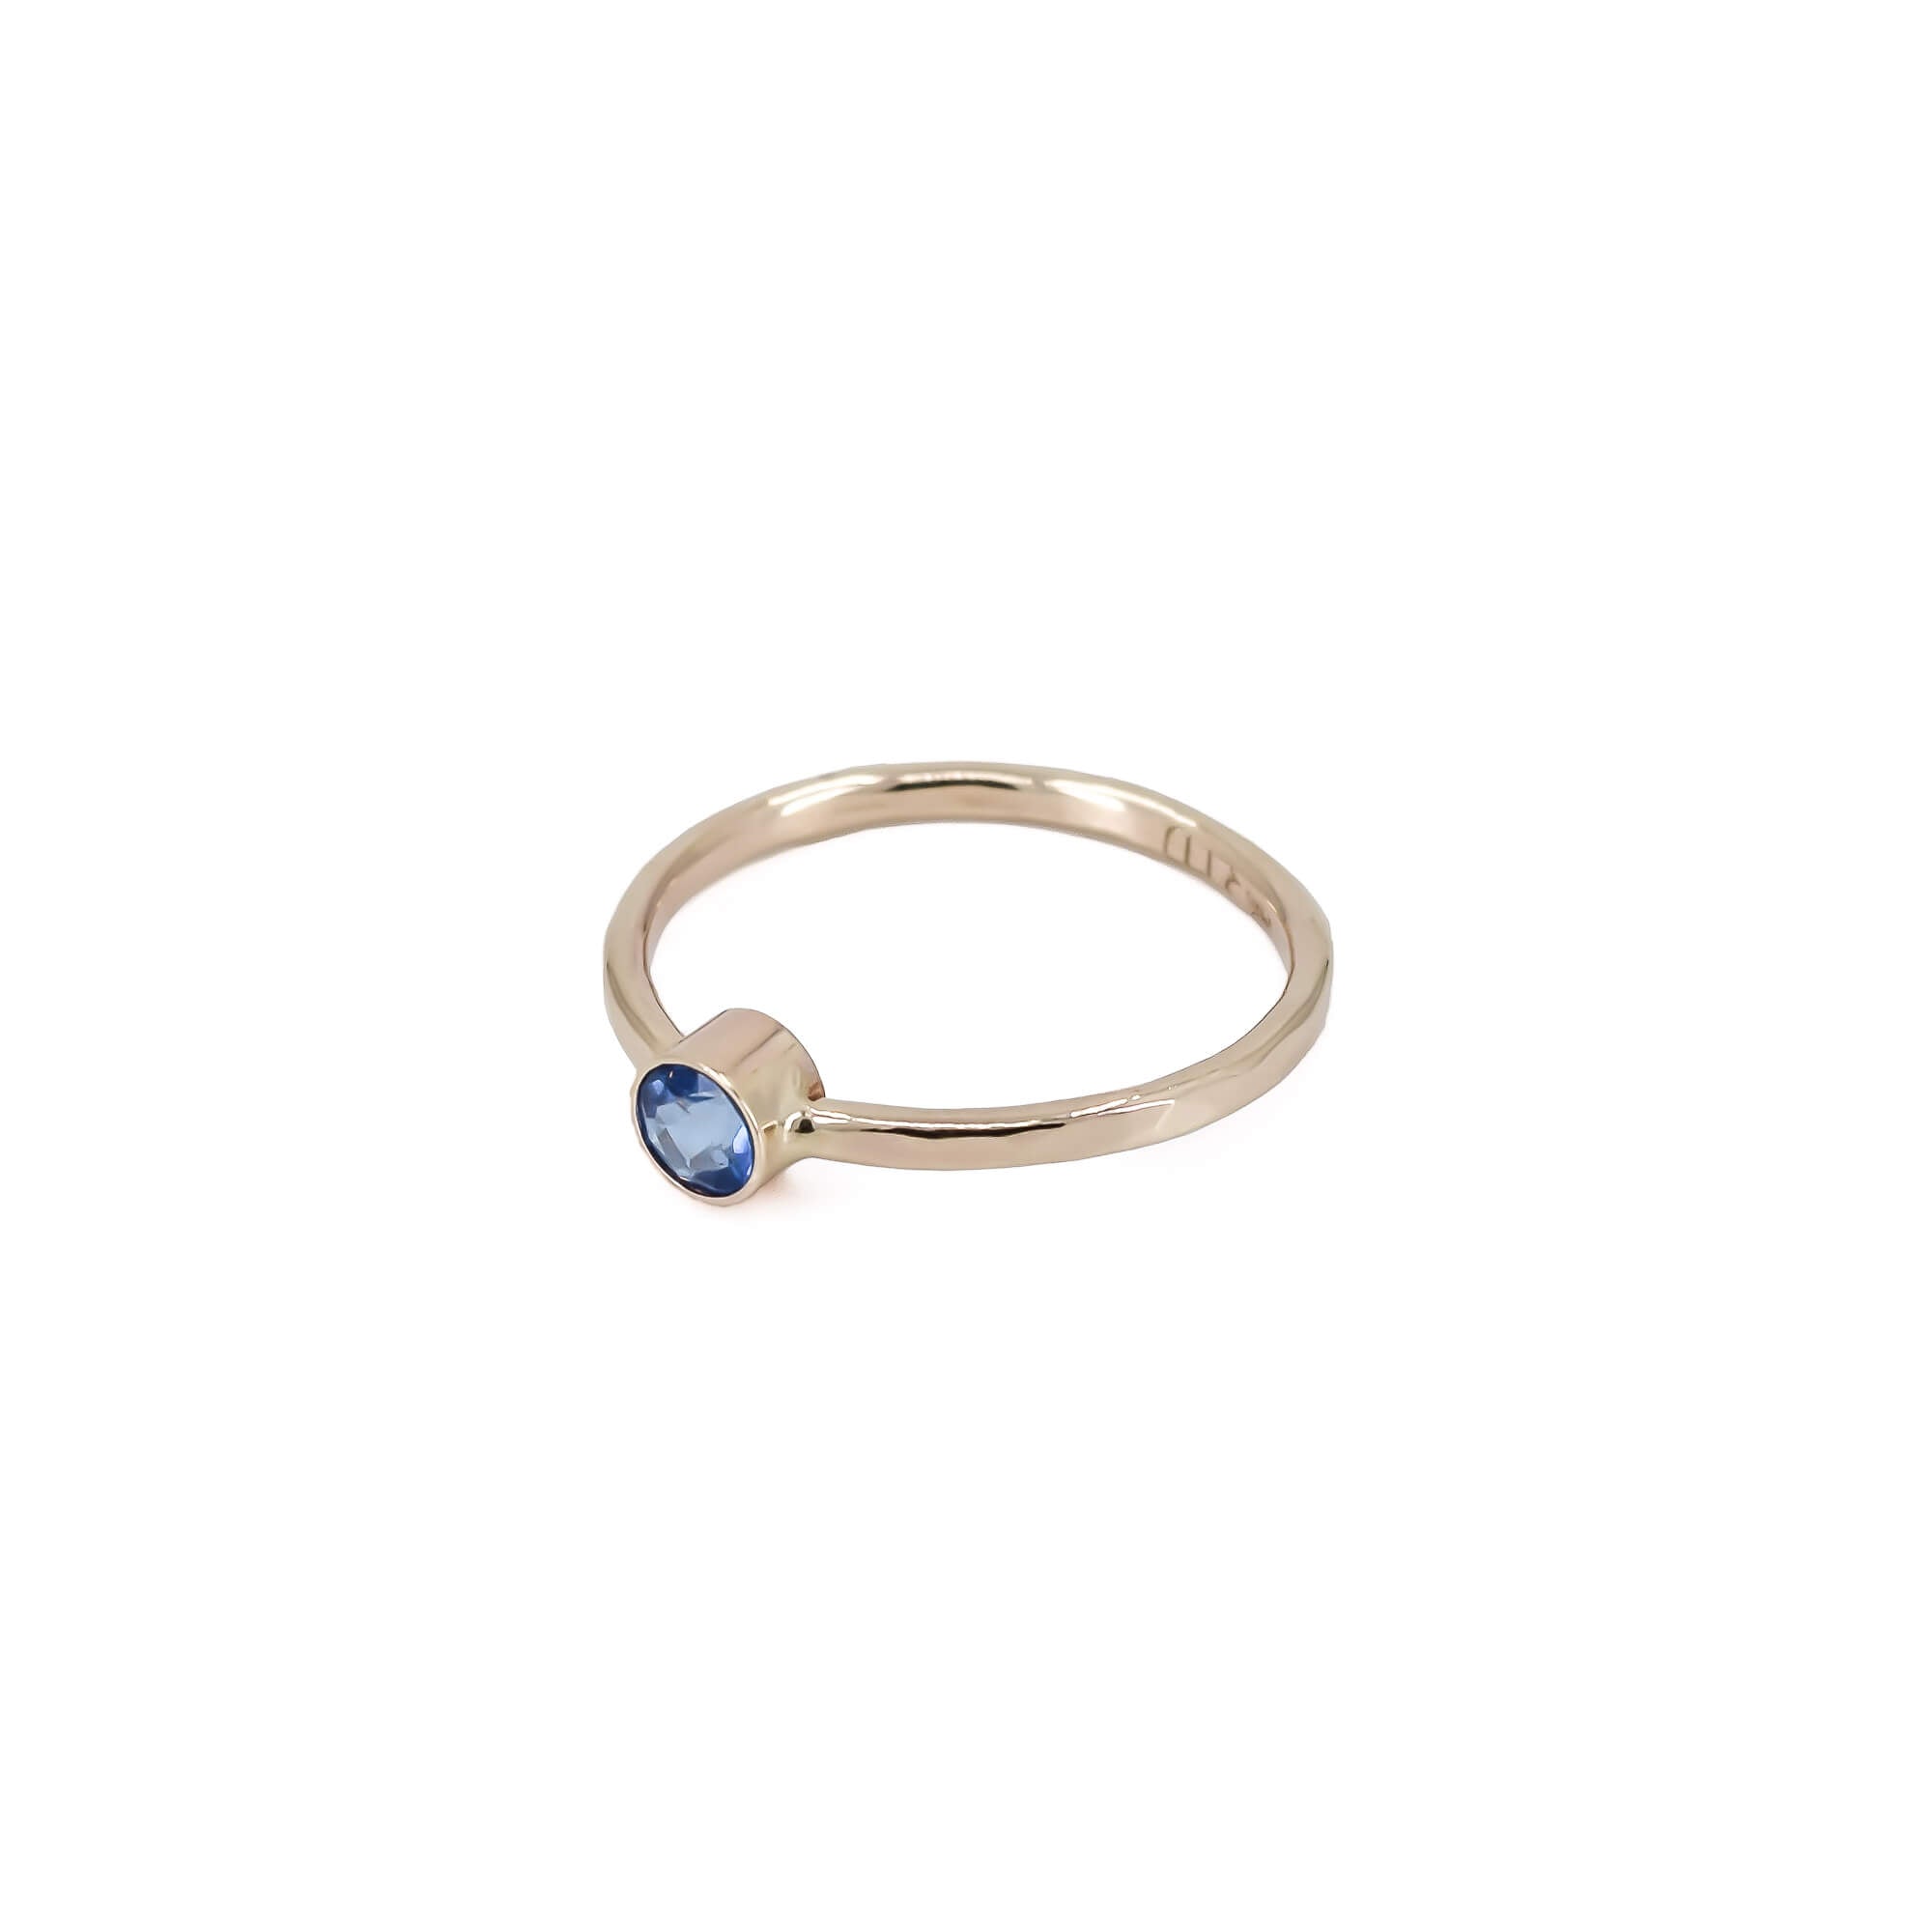 14K yellow gold ring with ice blue topaz faceted stone and faceted band